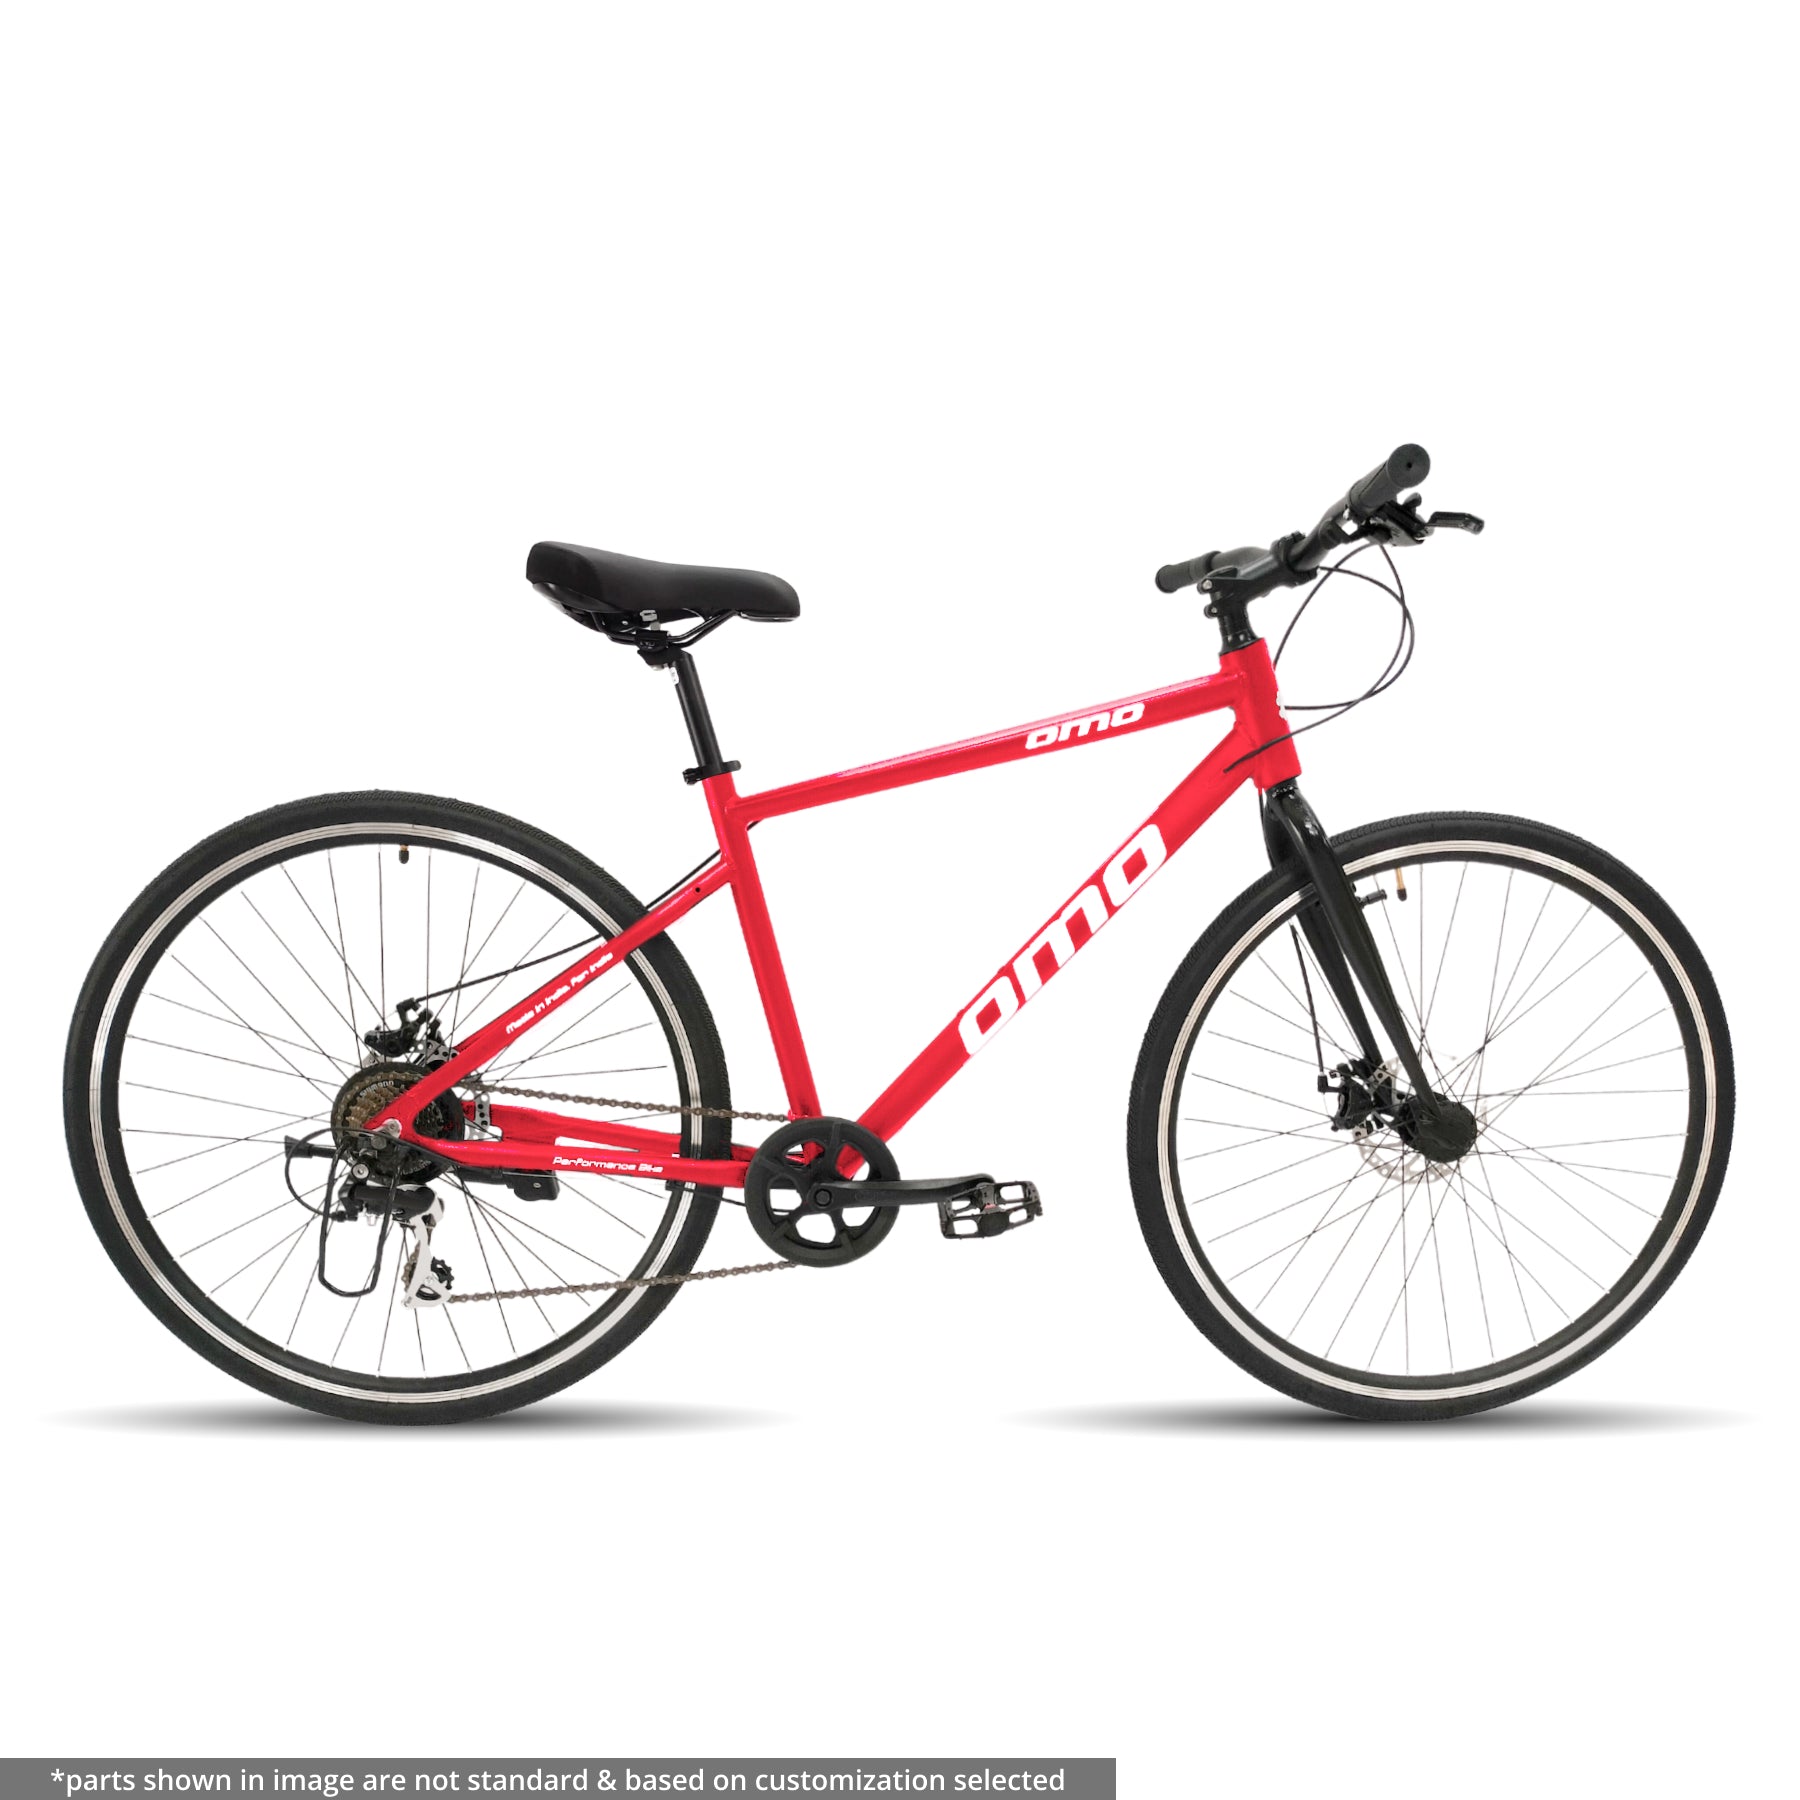 Alloy frame Light weight hybrid bike with 7 gear under 15000 in india by omobikes hampi red color